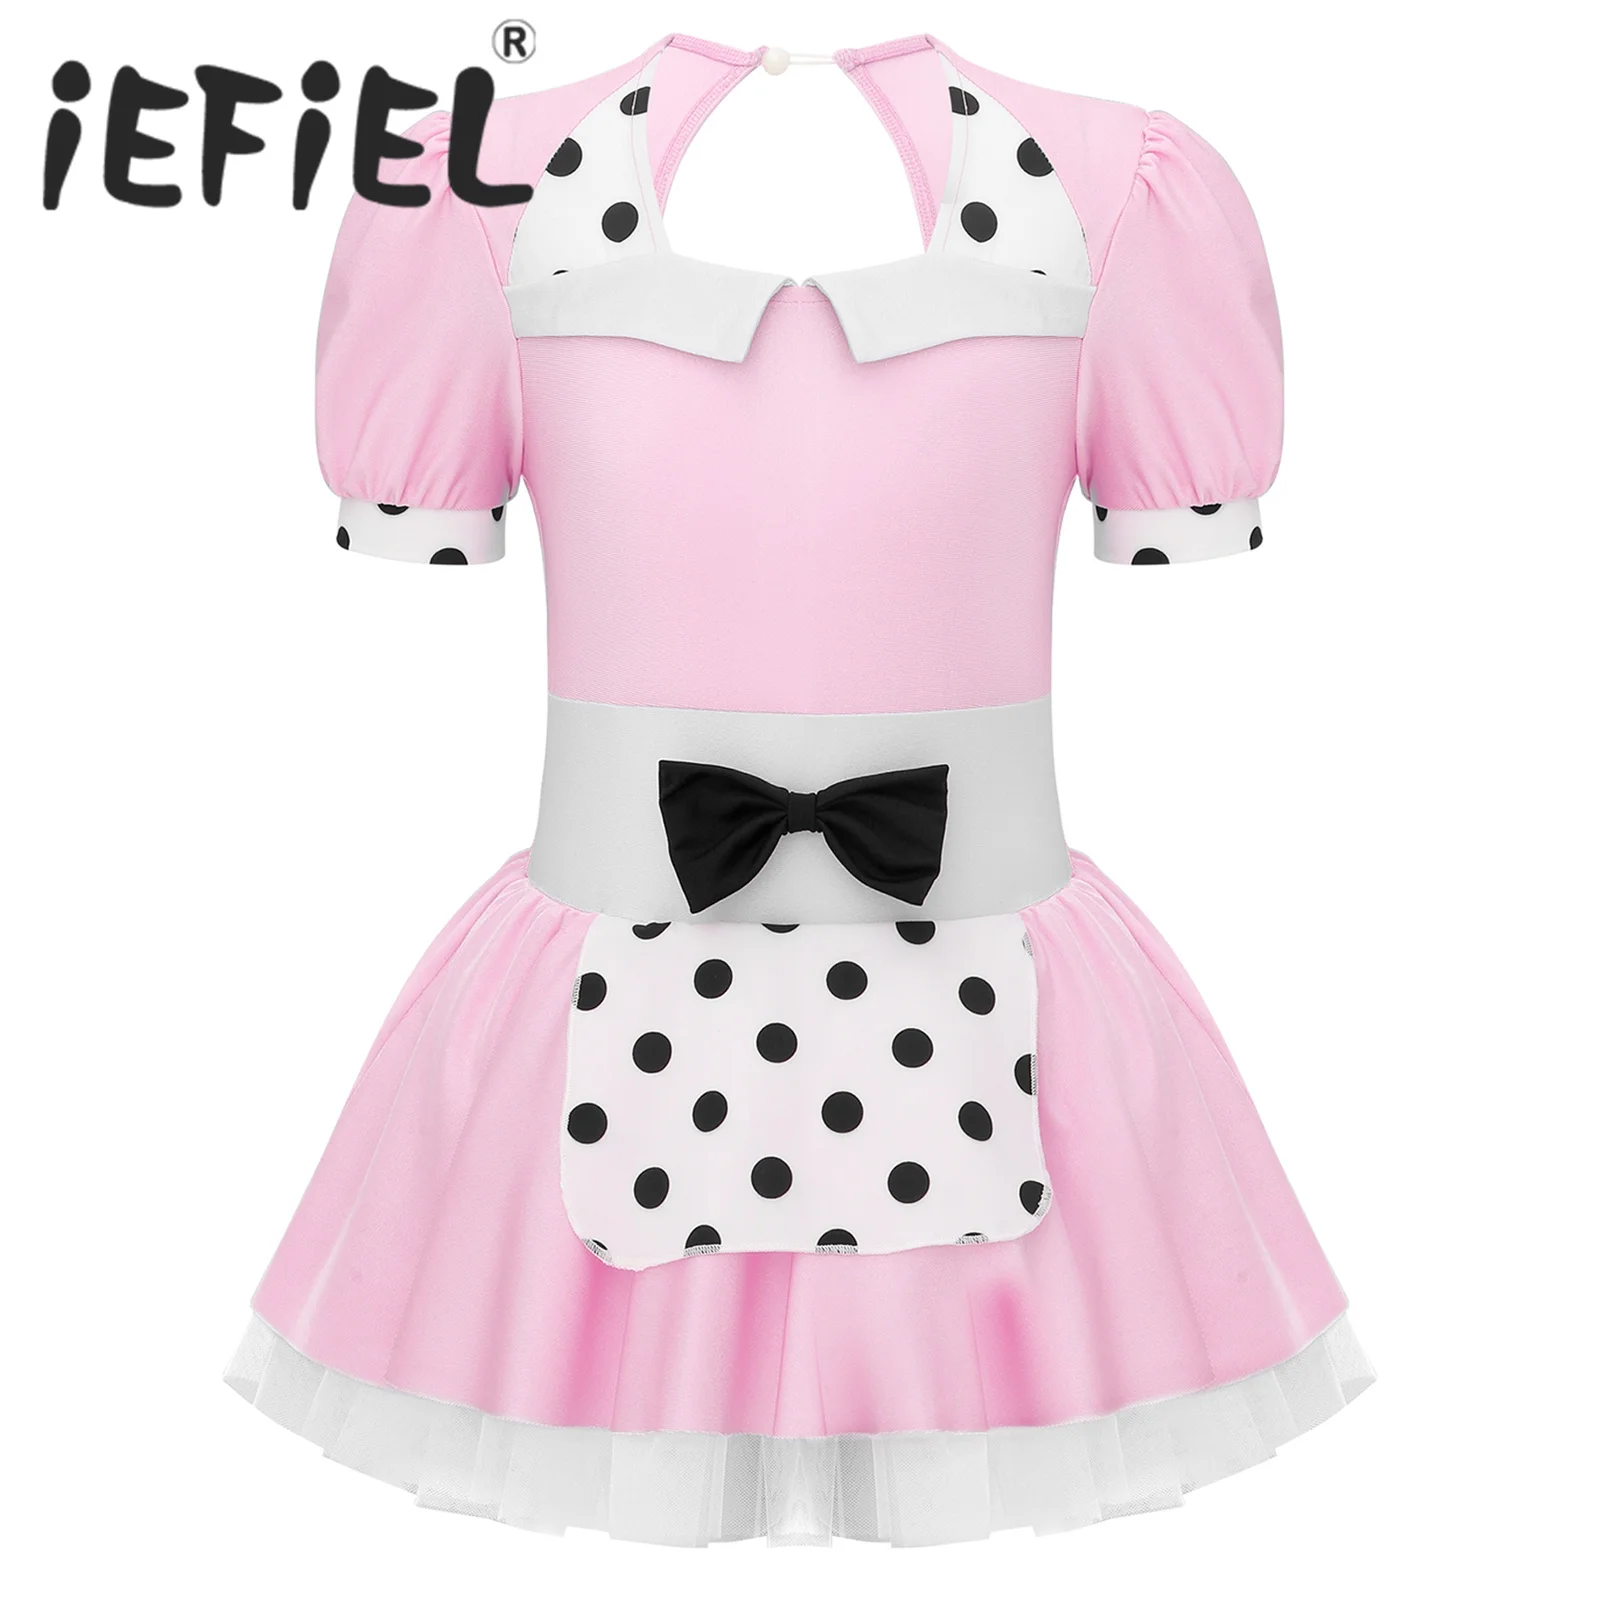 

Kids Girls Halloween Maid Costume Children Polka Dots Carnival Cosplay Tutu Dress with Apron for Themed Party Dress Up Clothes